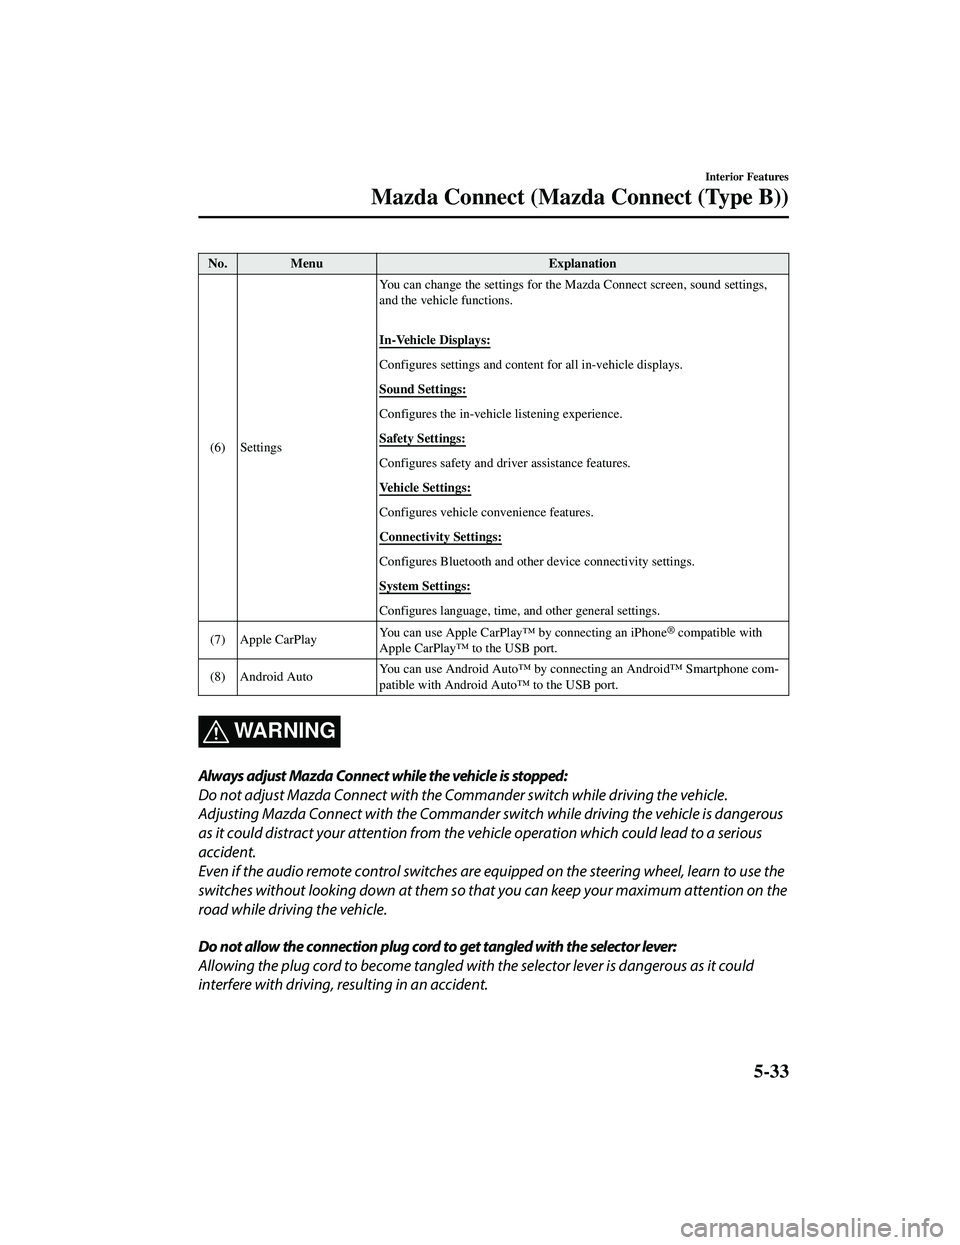 MAZDA MODEL CX-5 2021  Owners Manual No. MenuExplanation
(6) Settings You can change the settings for the 
Mazda Connect screen, sound settings,
and the vehicle functions.
 
In-Vehicle Displays:
Configures settings and content  for all i